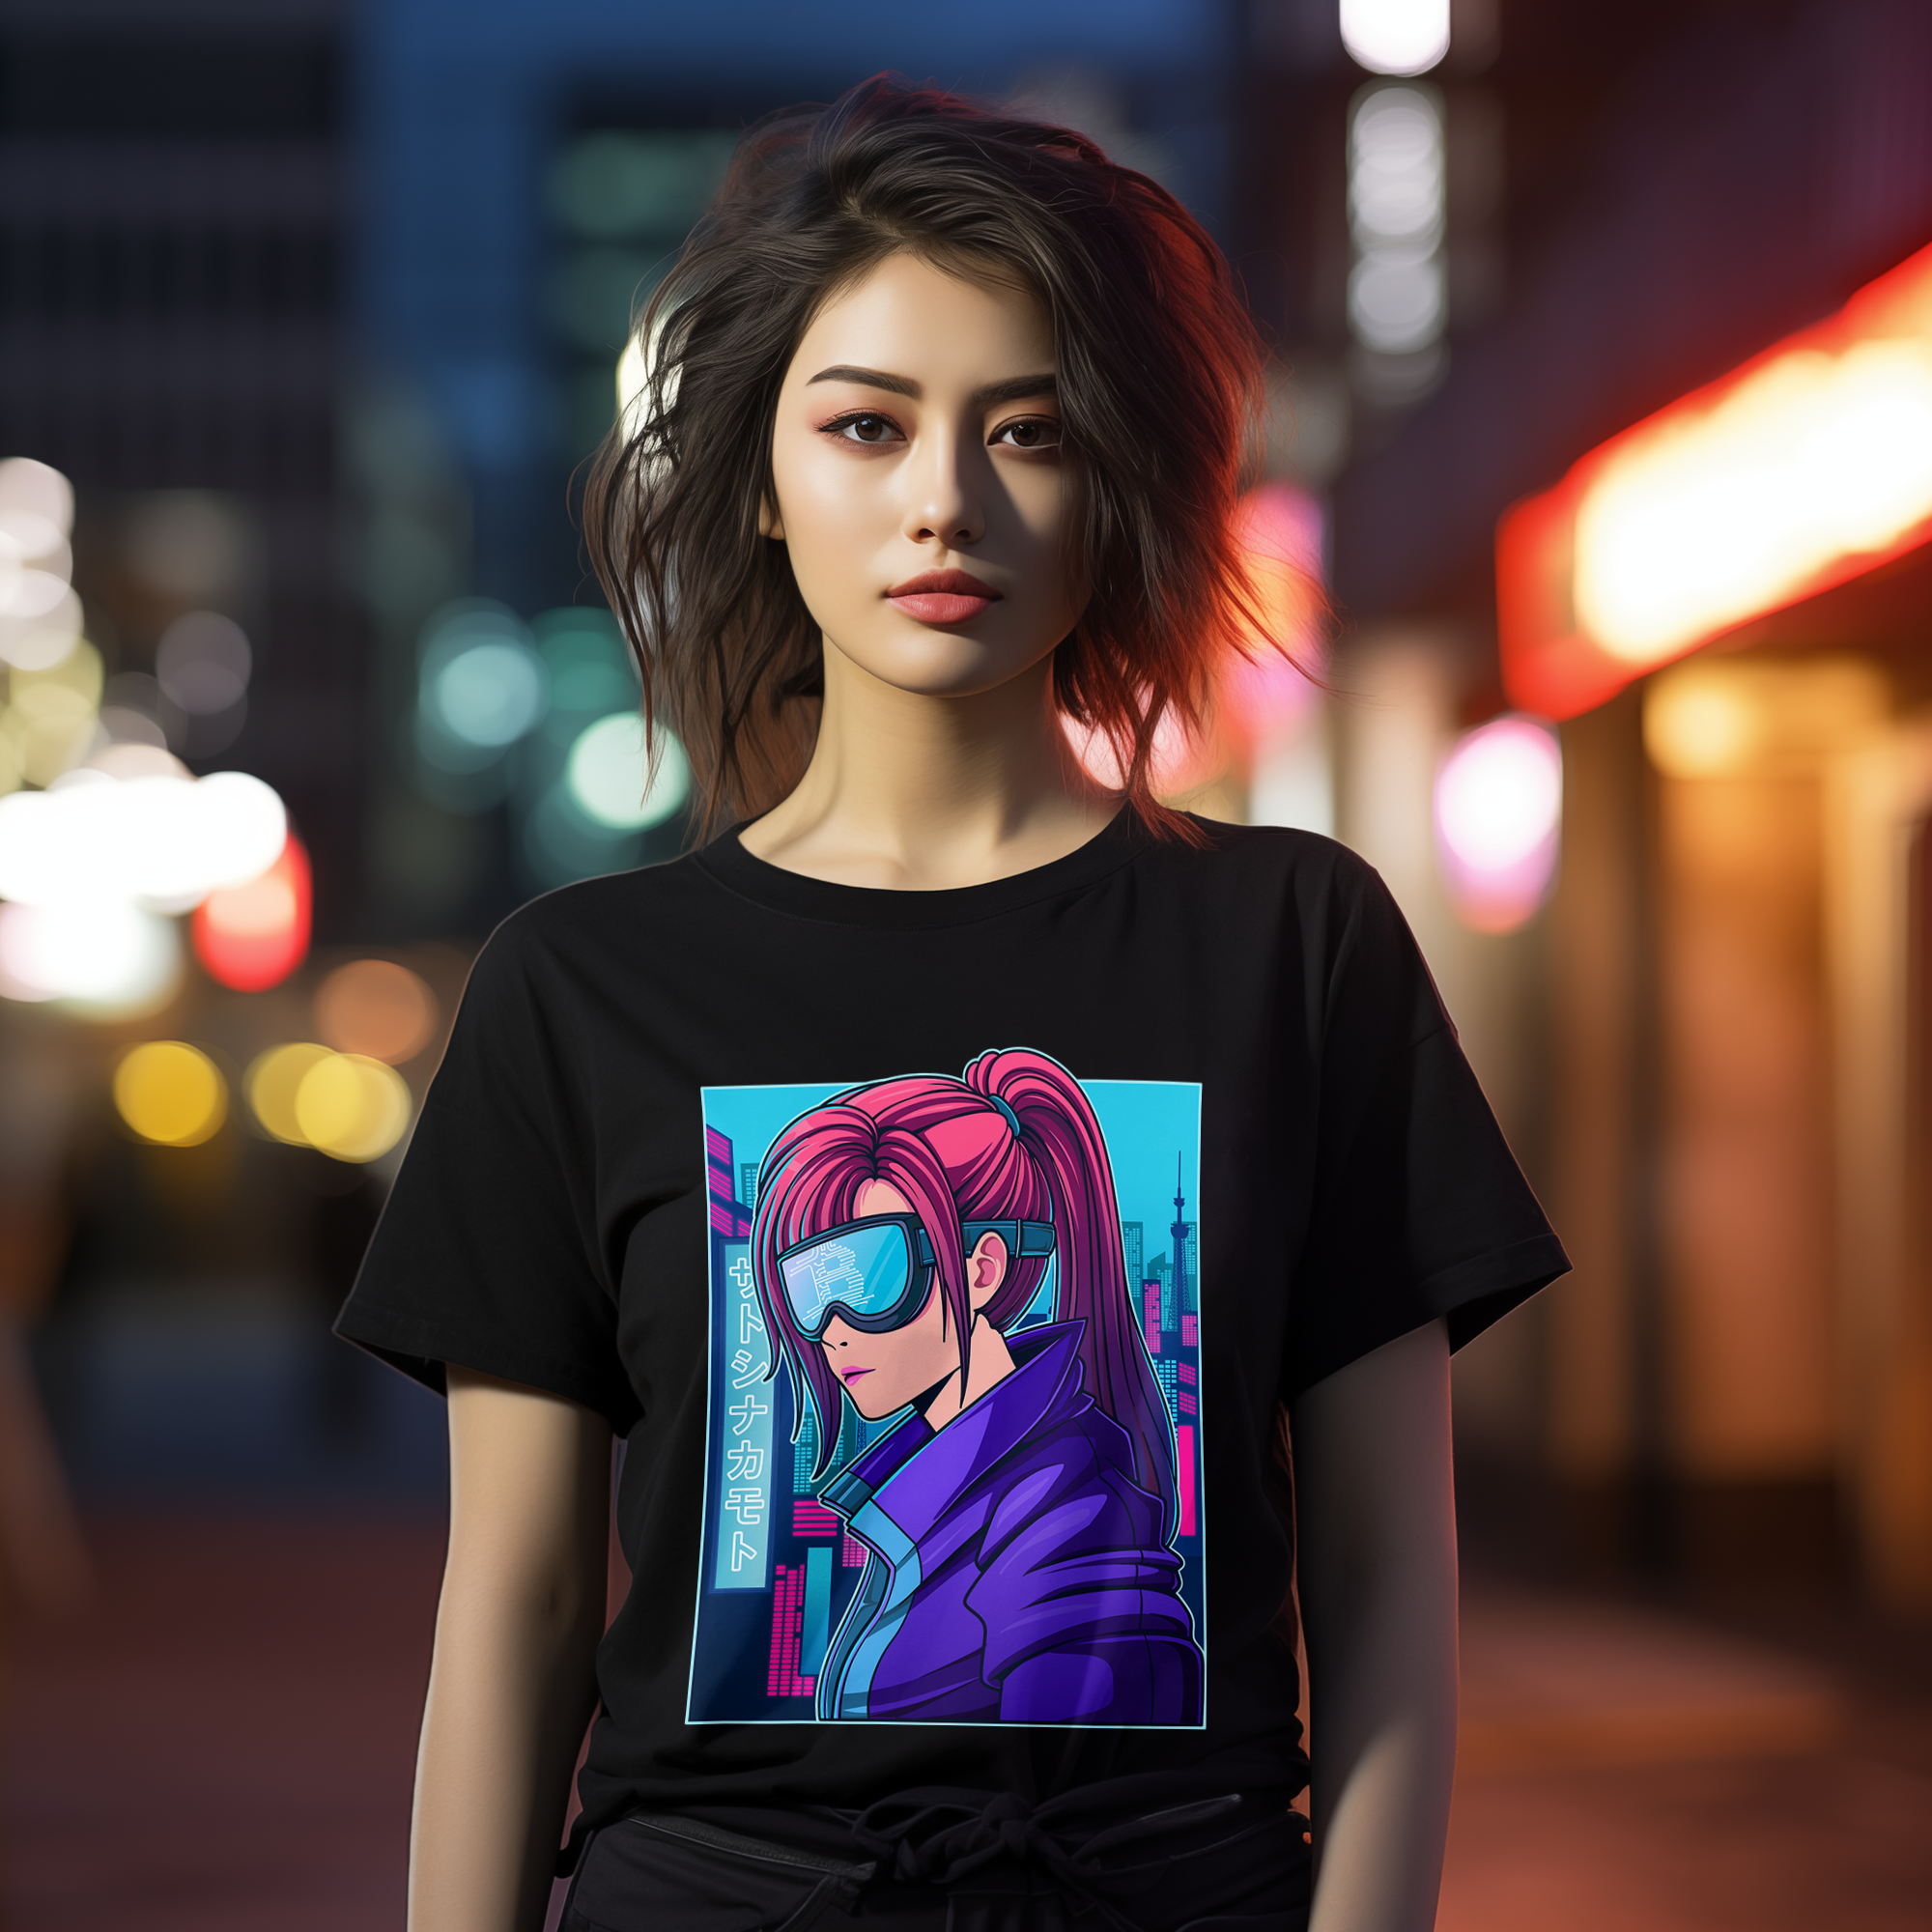 Bitcoin Merch - The Future Is Bitcoin Tee. Female model image (front view).